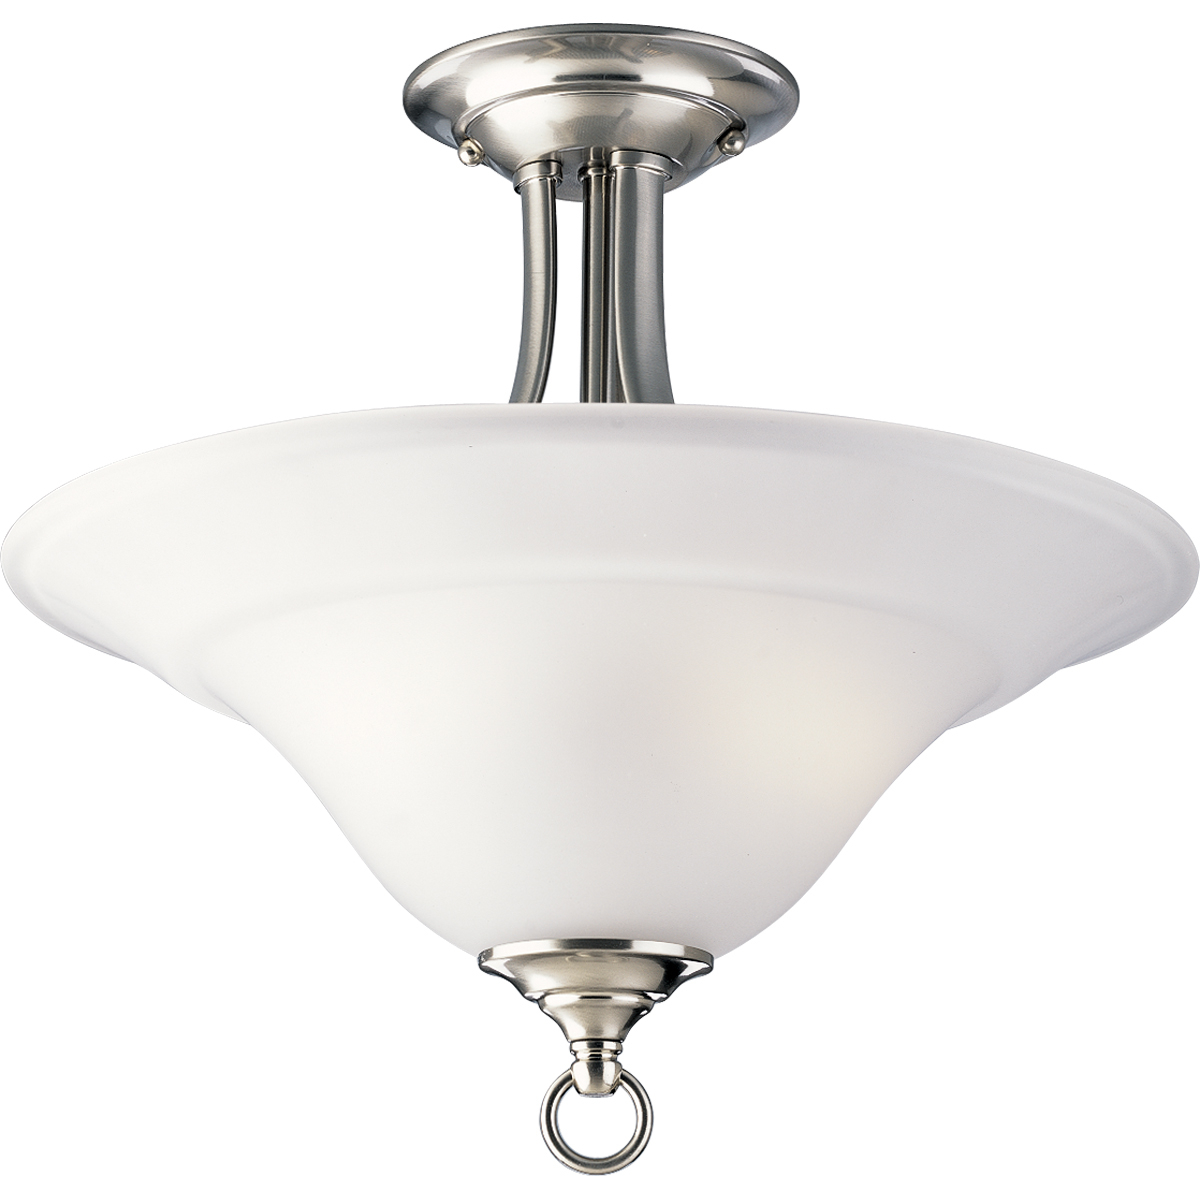 Two-light semi-flush close-to-ceiling fixture featuring soft angles, curving lines and etched glass shades. Gracefully exotic, the Trinity Collection offers classic sophistication for transitional interiors. Sculptural forms of metal and glass are enhanced by a classic finish. This transitional style can transform a room or your whole home with its charming versatility. Brushed Nickel finish.